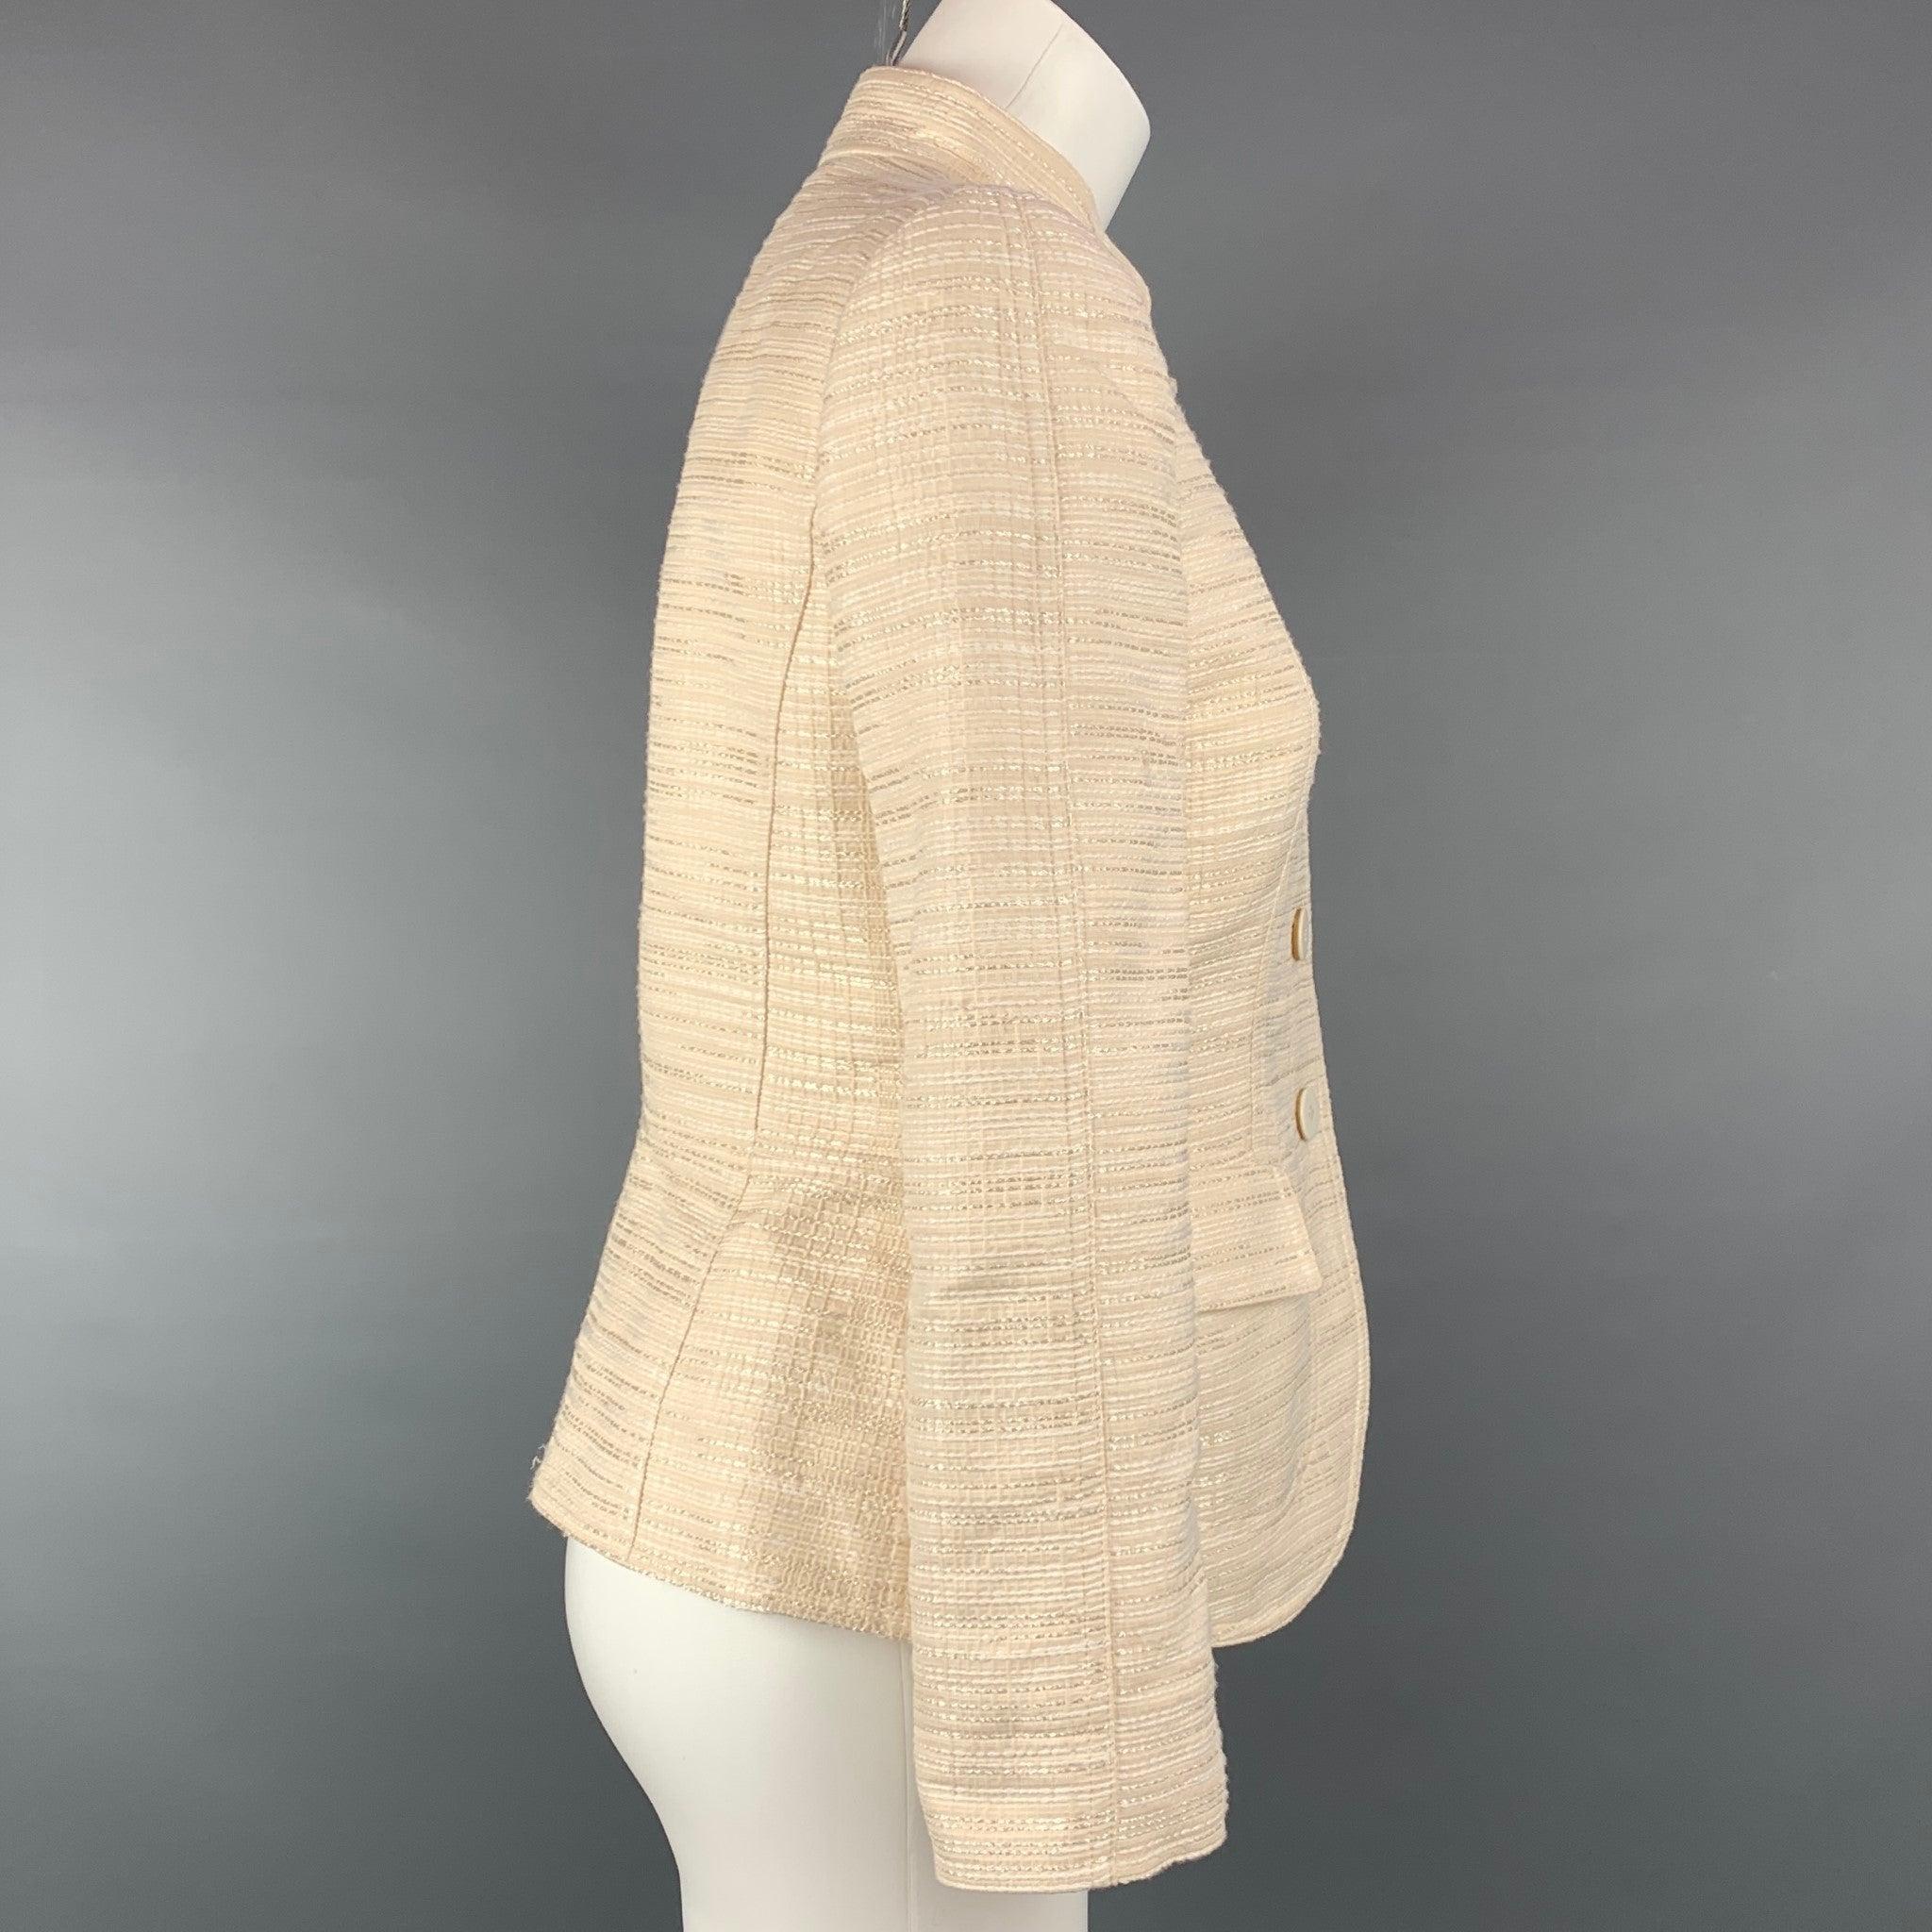 ARMANI COLLEZIONI jacket comes in a cream seersucker silk / viscose with a full liner featuring a nehru collar, flap pockets, and a buttoned closure. Made in Italy.Very Good
Pre-Owned Condition. 

Marked:   6 

Measurements: 
 
Shoulder:
15 inches 